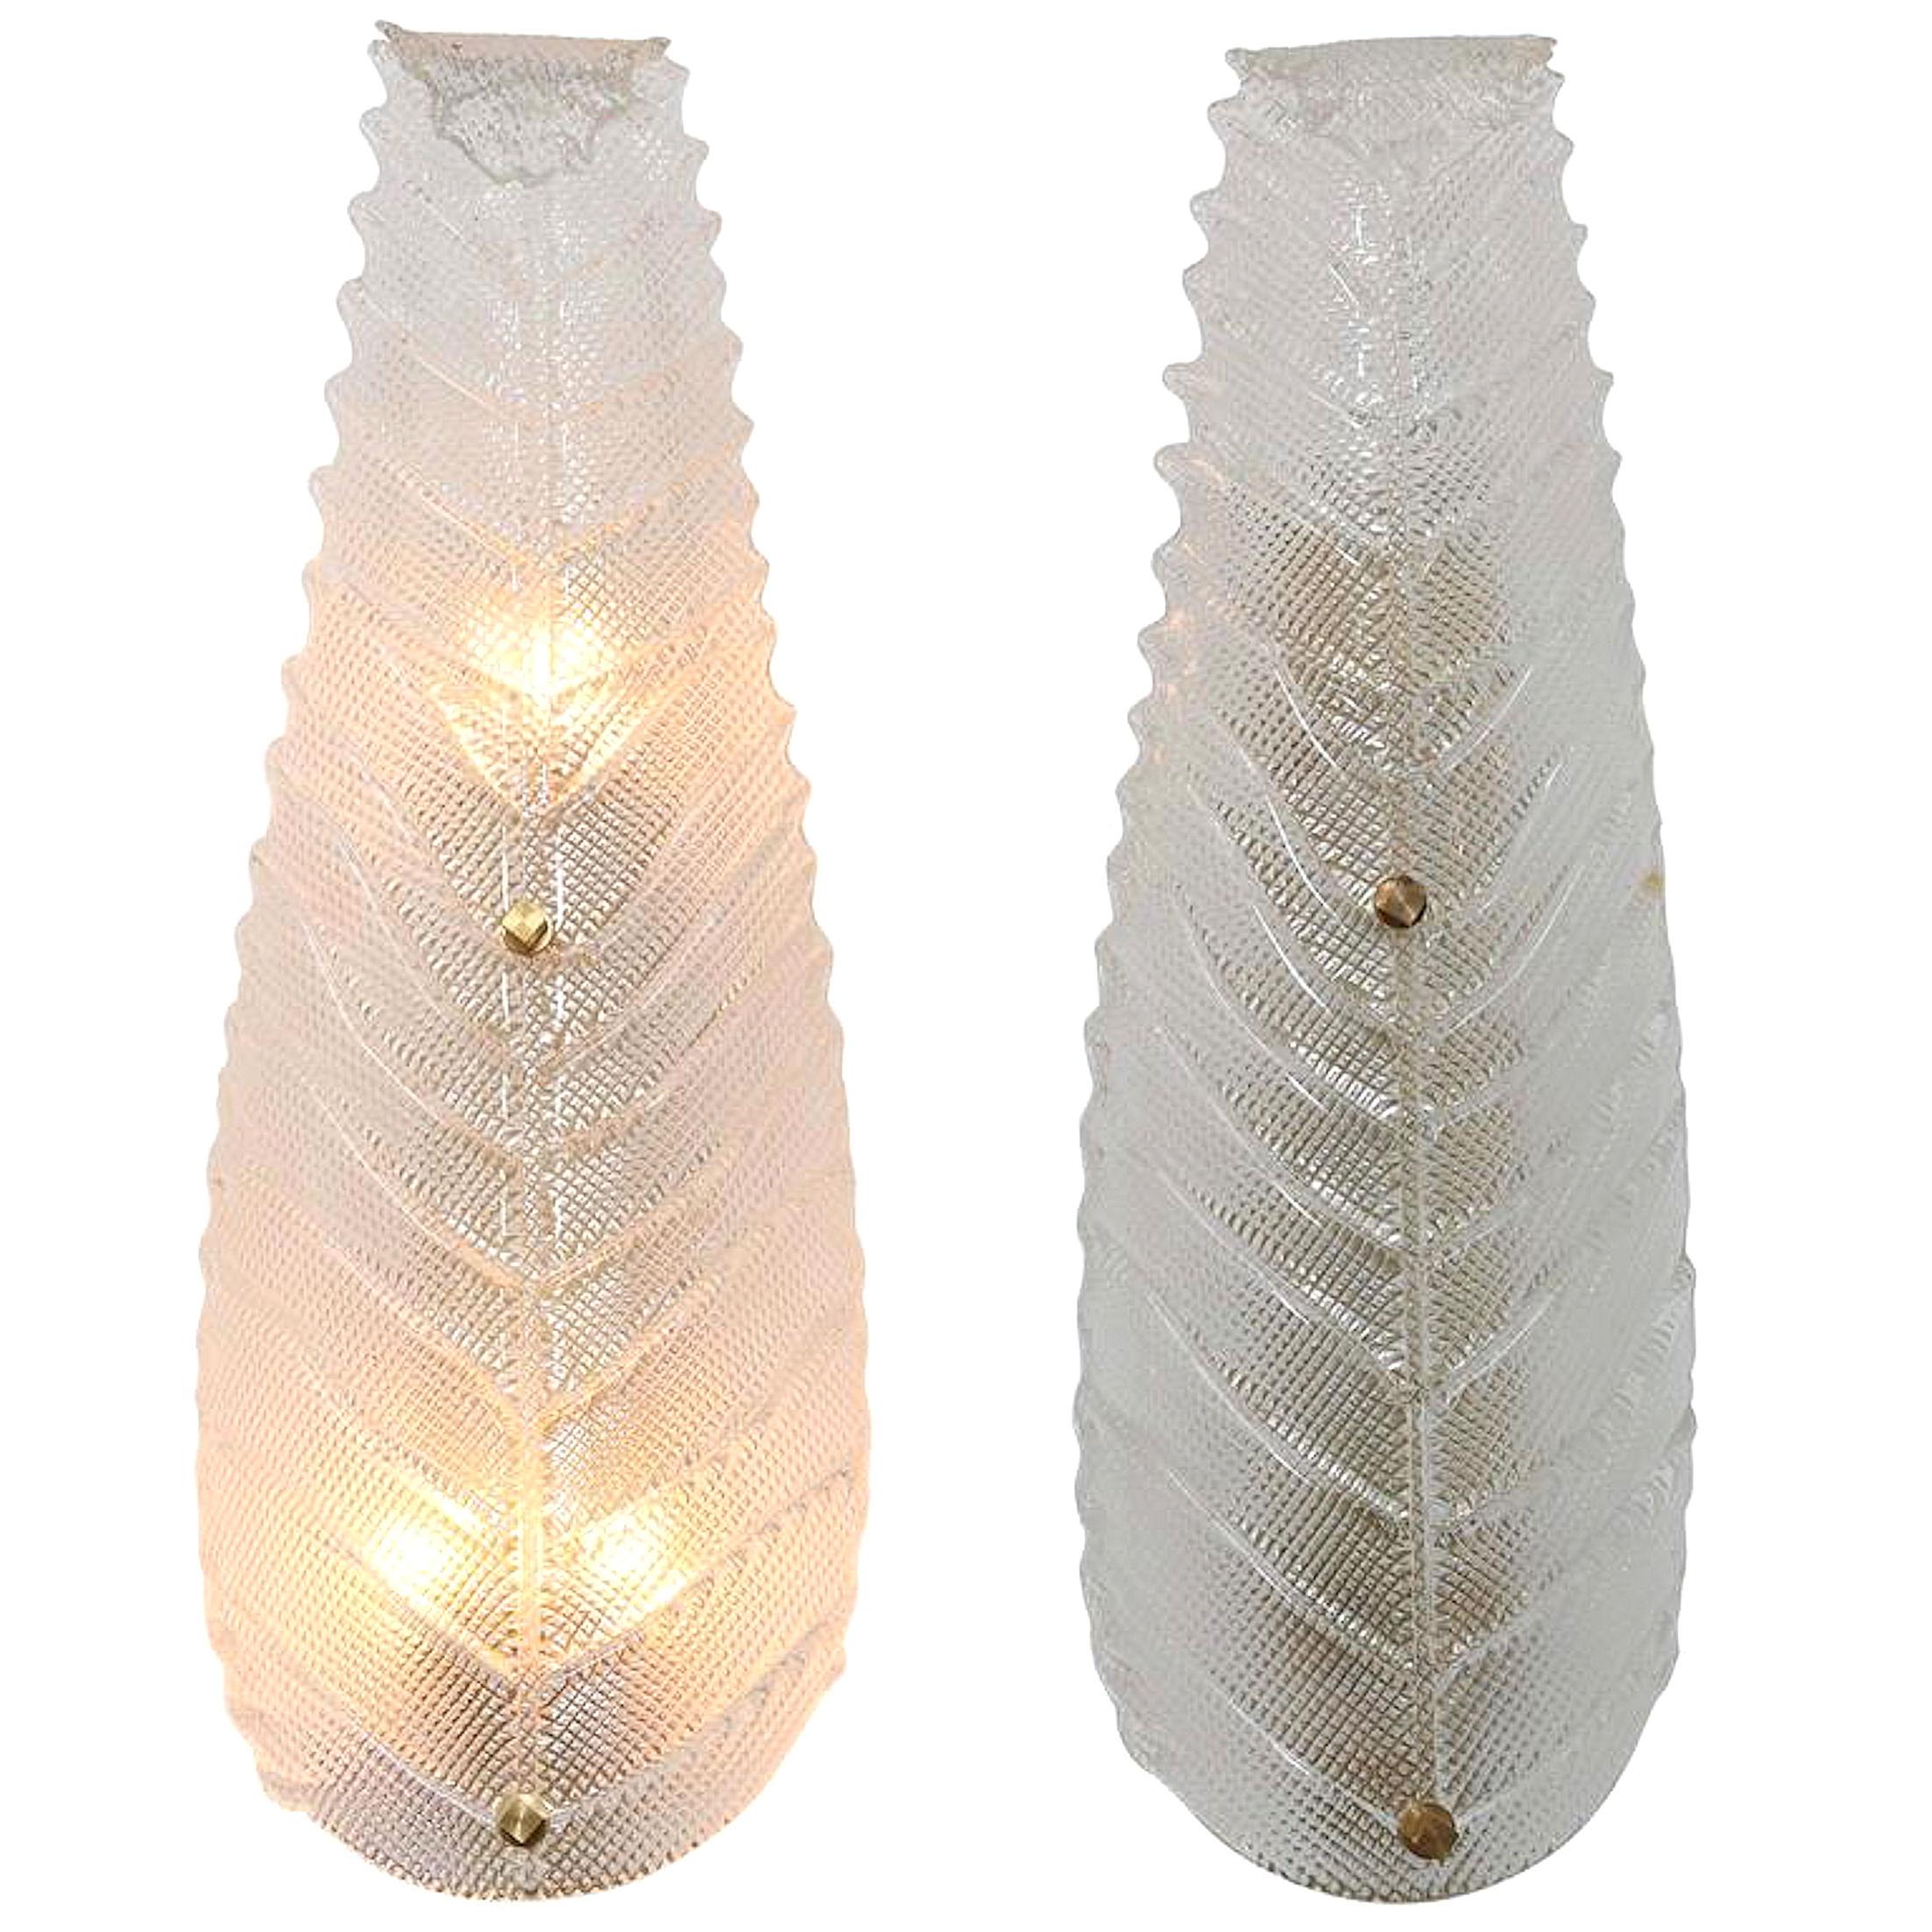 Pair of Mid-Century Modern Murano Textured Clear Glass Leaf Sconces, 1970s